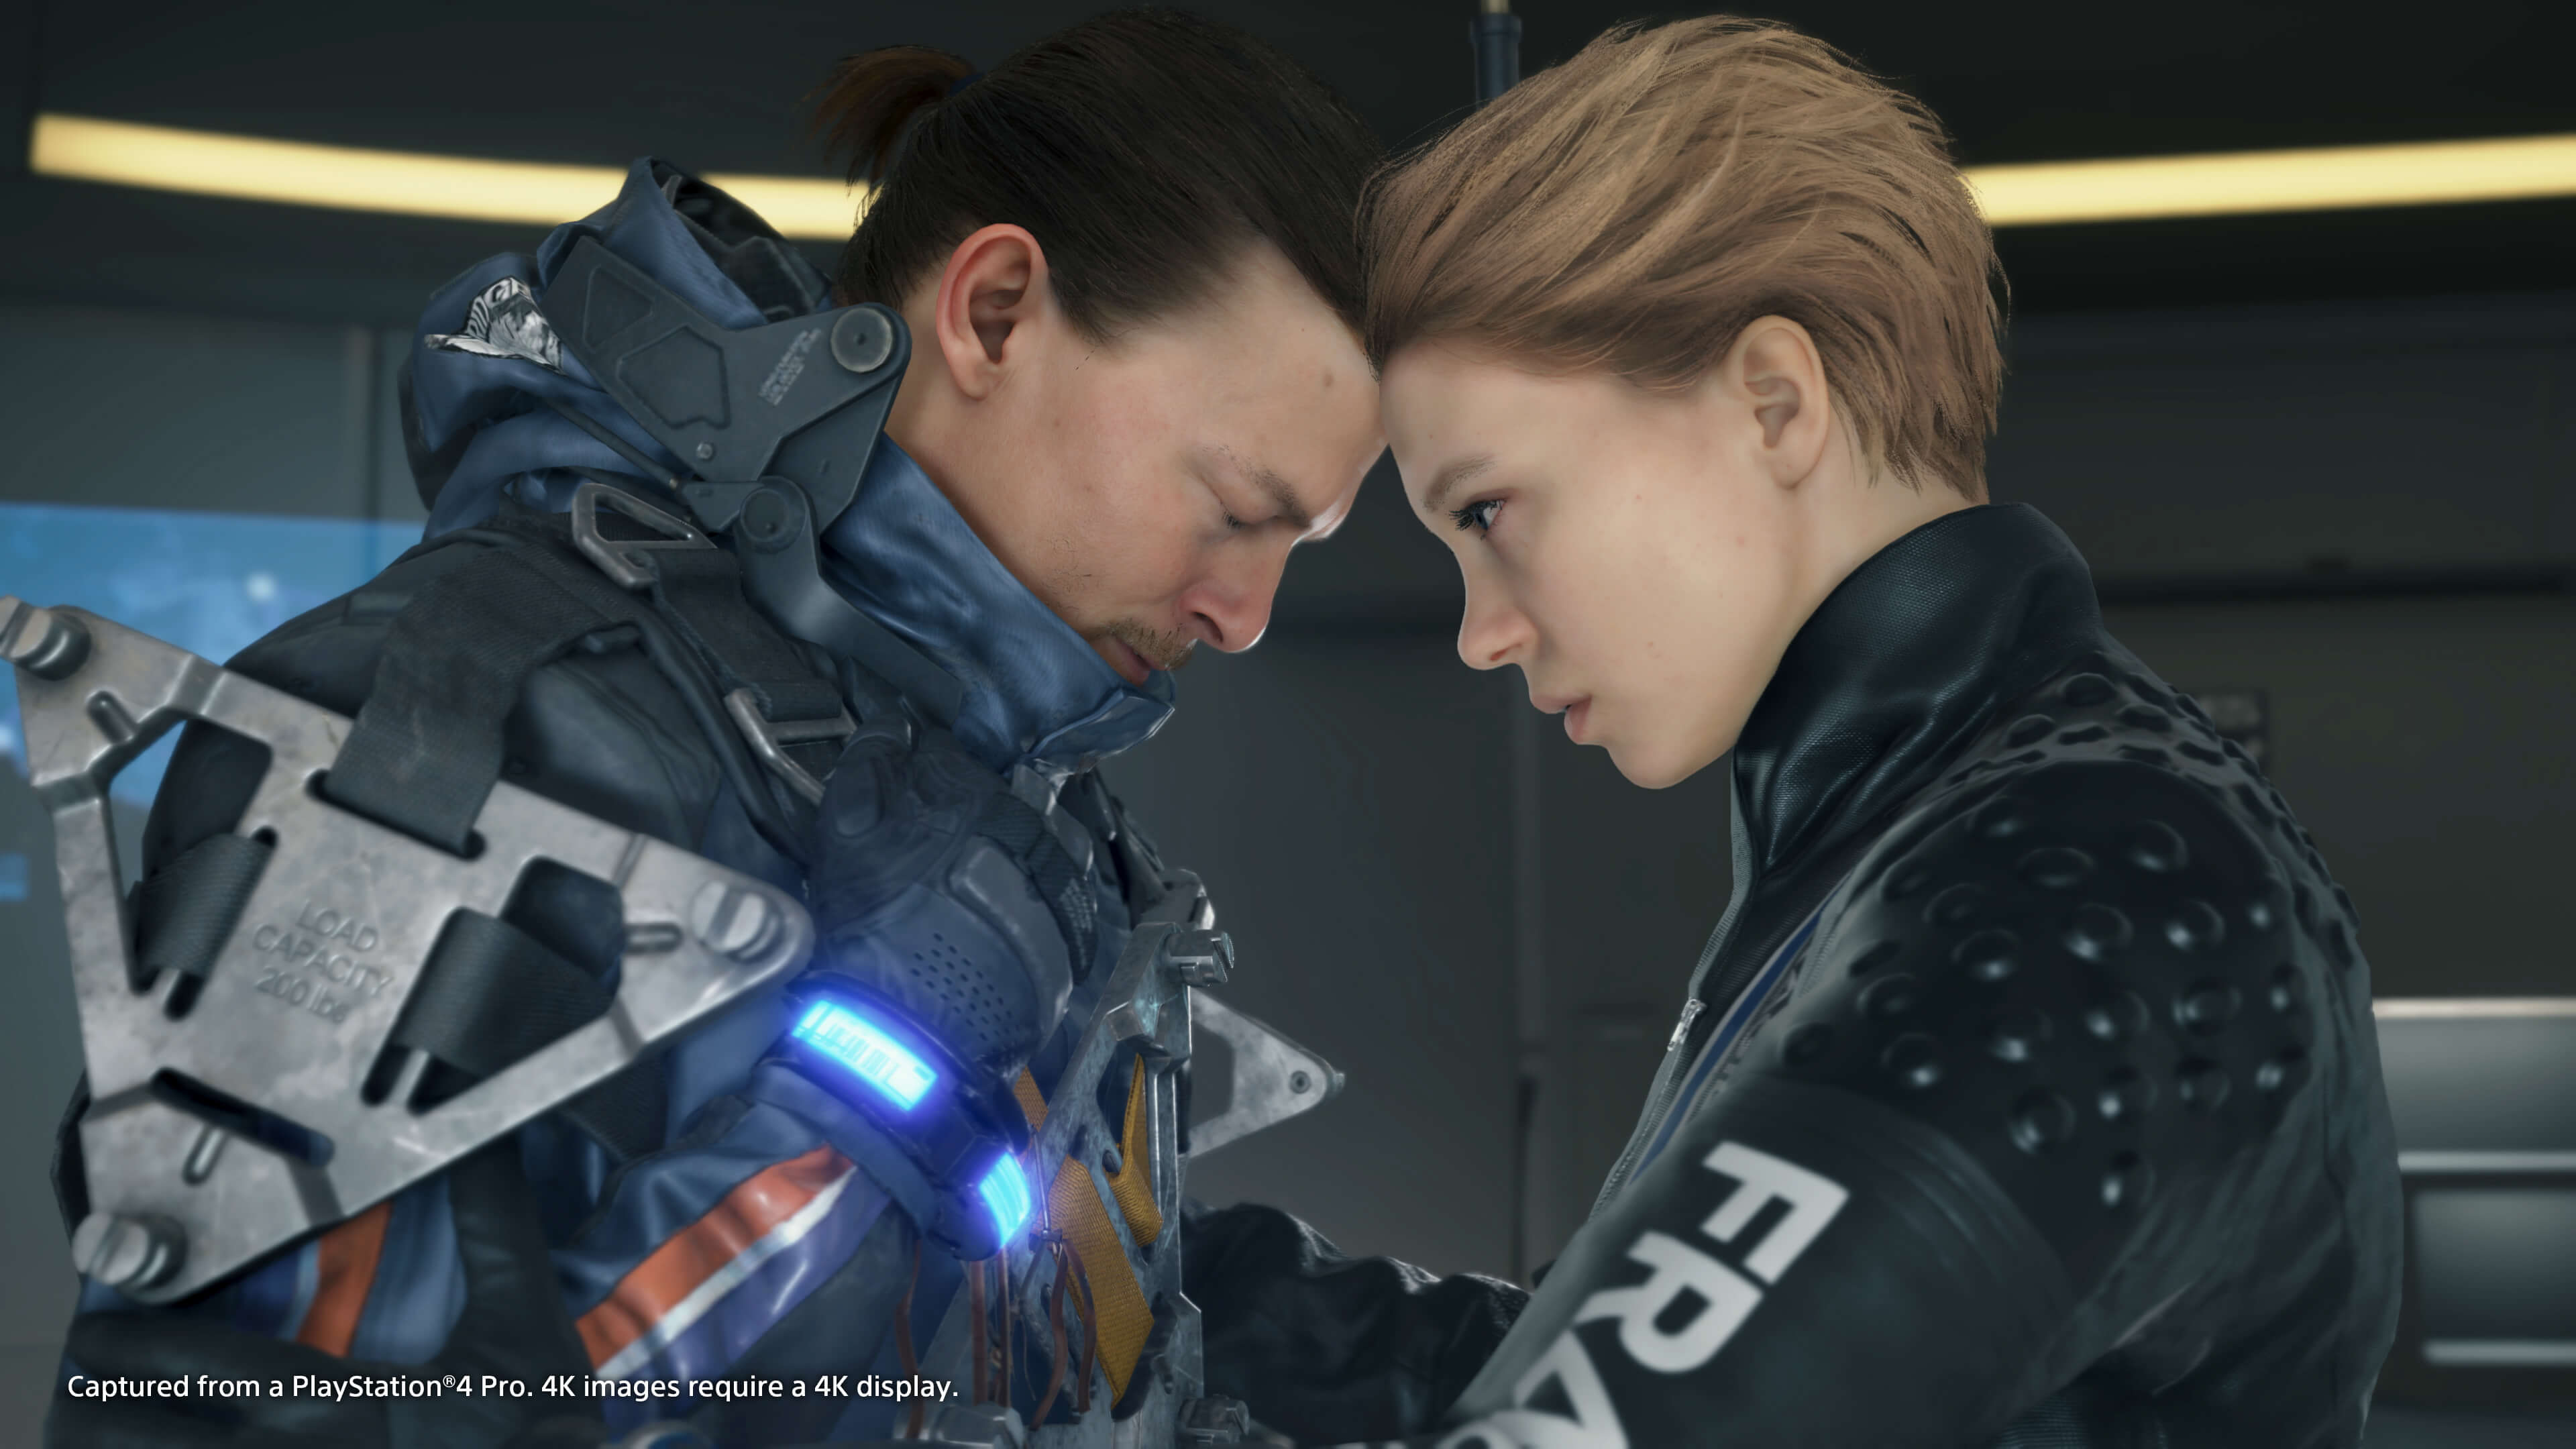 DEATH STRANDING TECH SPECS AND COMMUNITY TOP TIPS